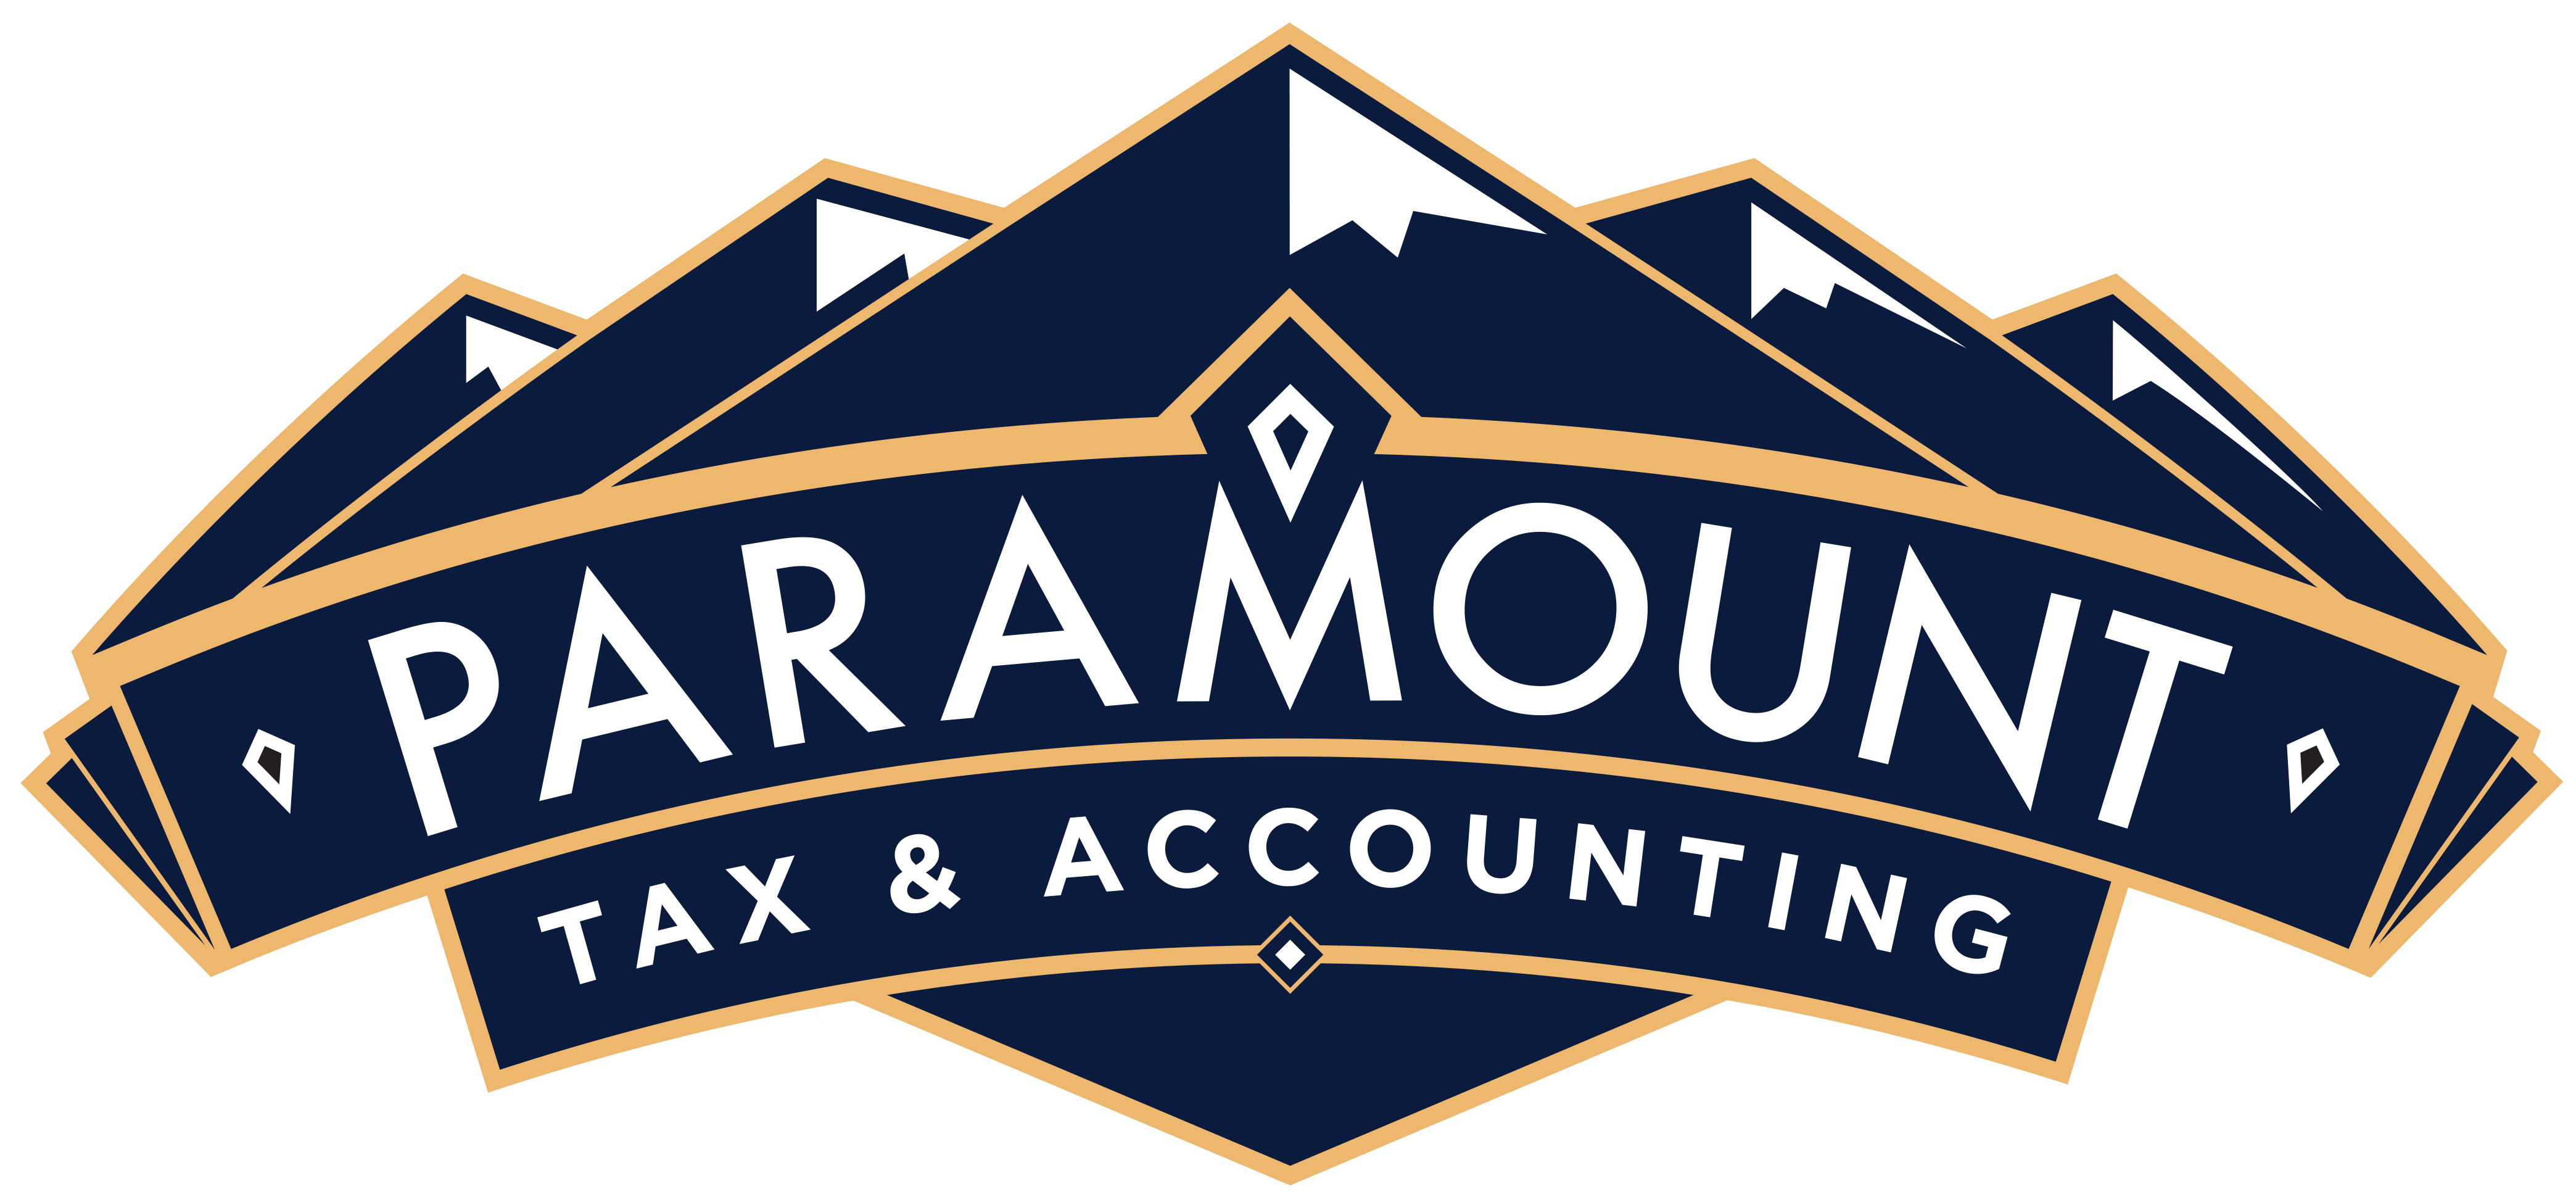 cpa accounting franchise